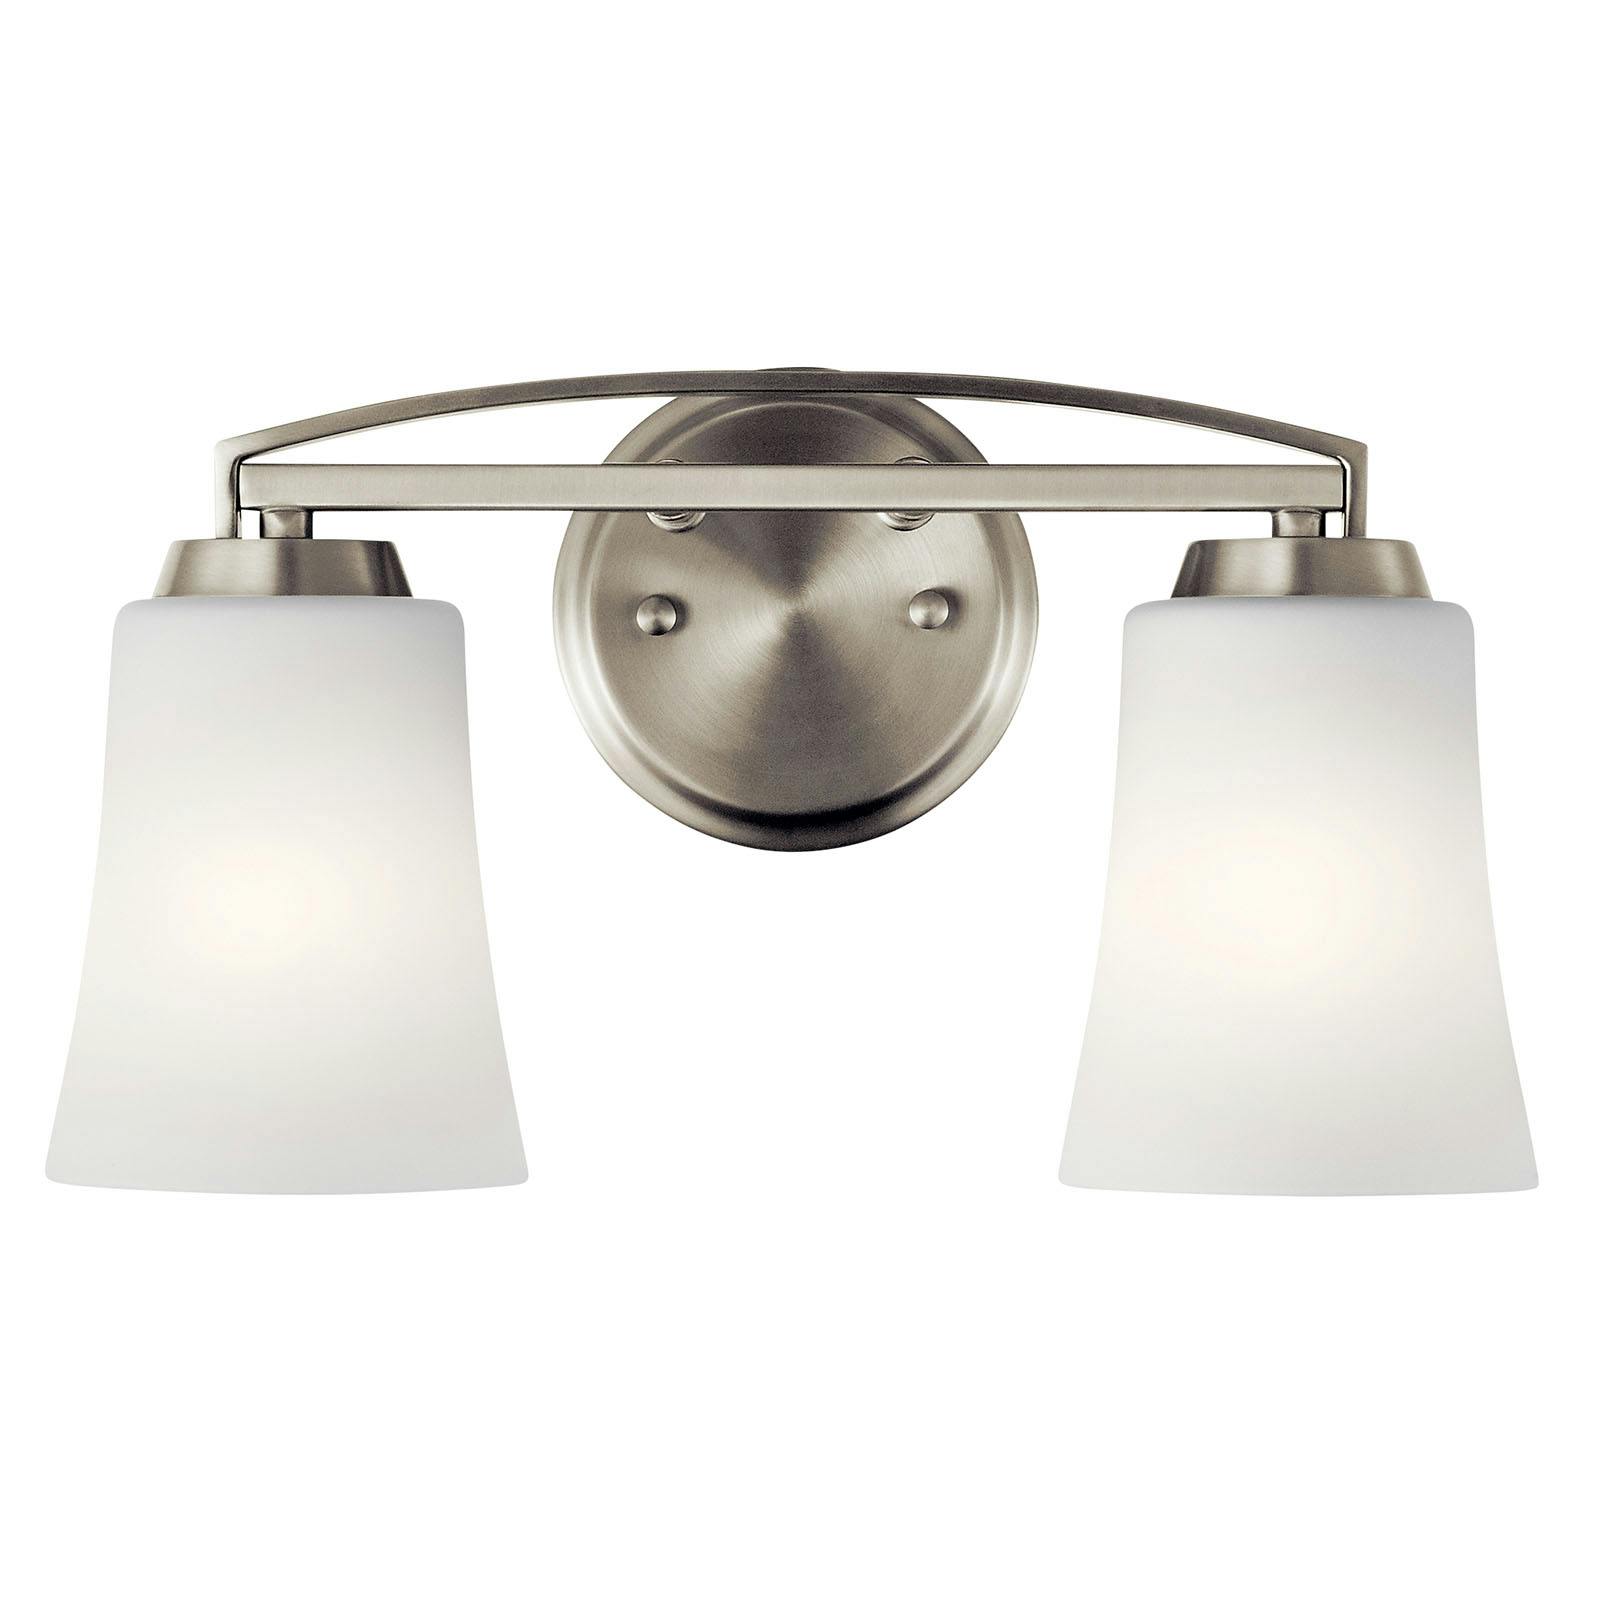 The Tao 2 Light Vanity Light Brushed Nickel facing down on a white background